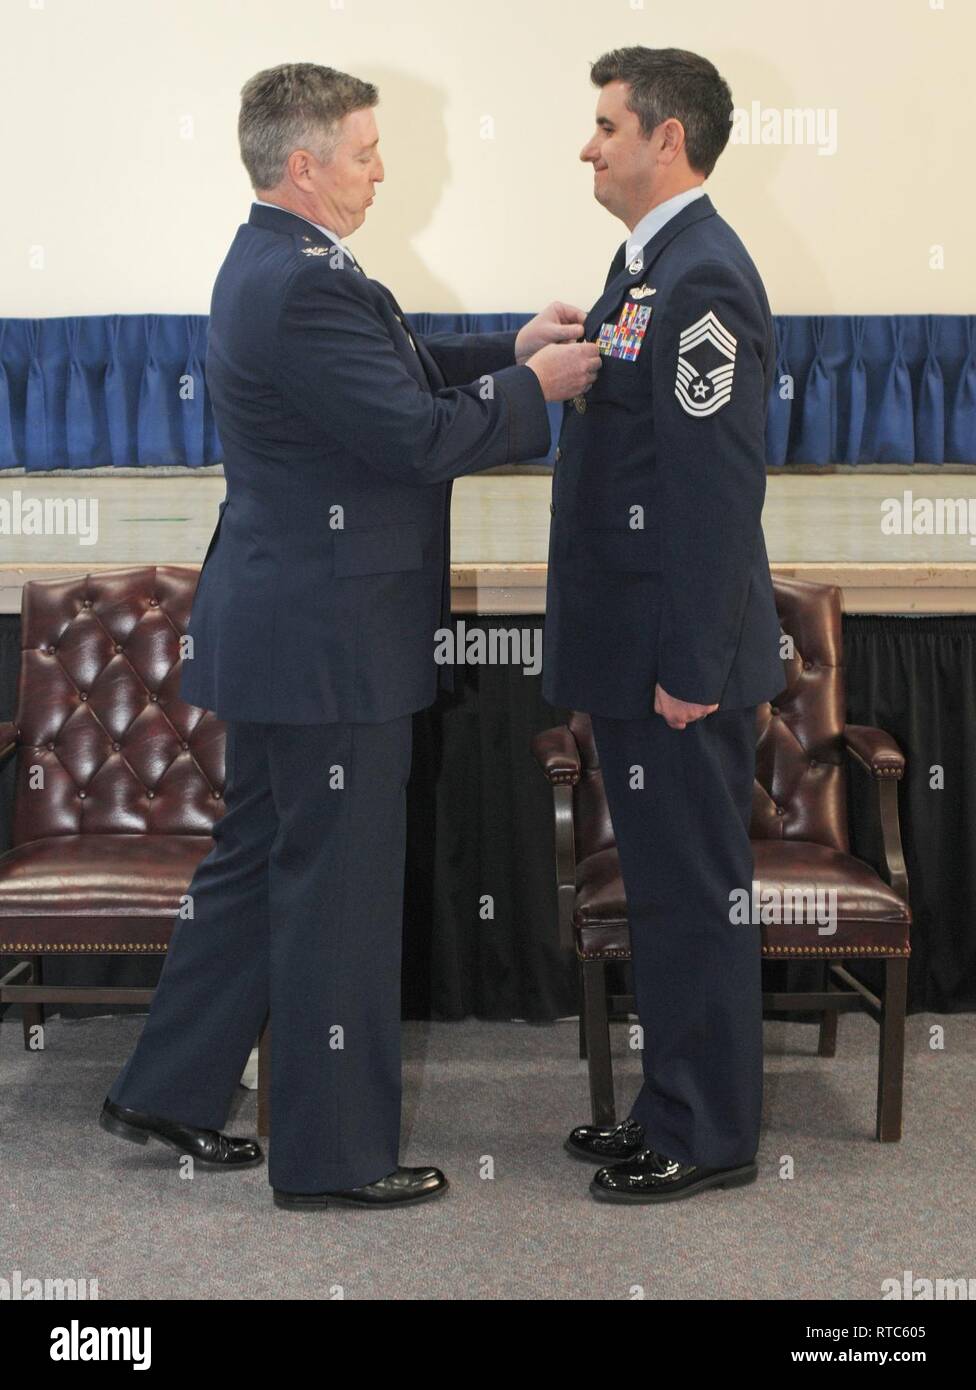 Col. John O’Brien, 111th Attack Wing Operations Group commander, pins a retirement medal on Chief Master Sgt. Robert, 111th Attack Wing Operations Group superintendent, during his retirement ceremony on Feb. 9, 2019 at the main auditorium at Horsham Air Guard Station. Robert was very instrumental in spearheading the MQ-9 Reaper remotely-piloted mission. Stock Photo